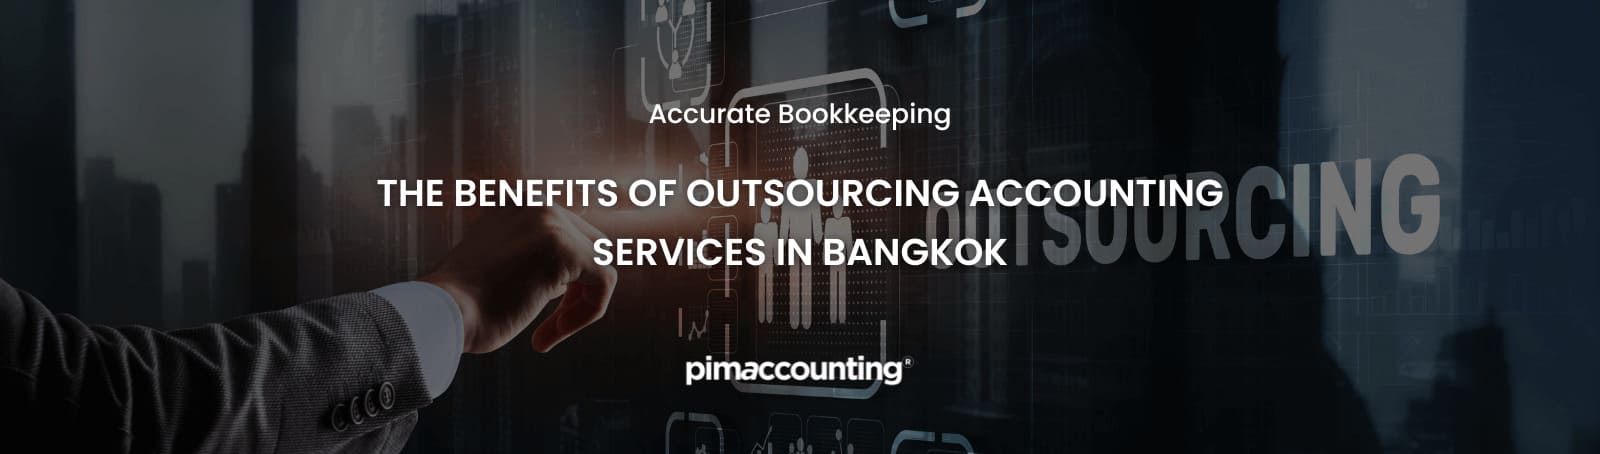 Outsourcing Accounting Services - pimaccounting